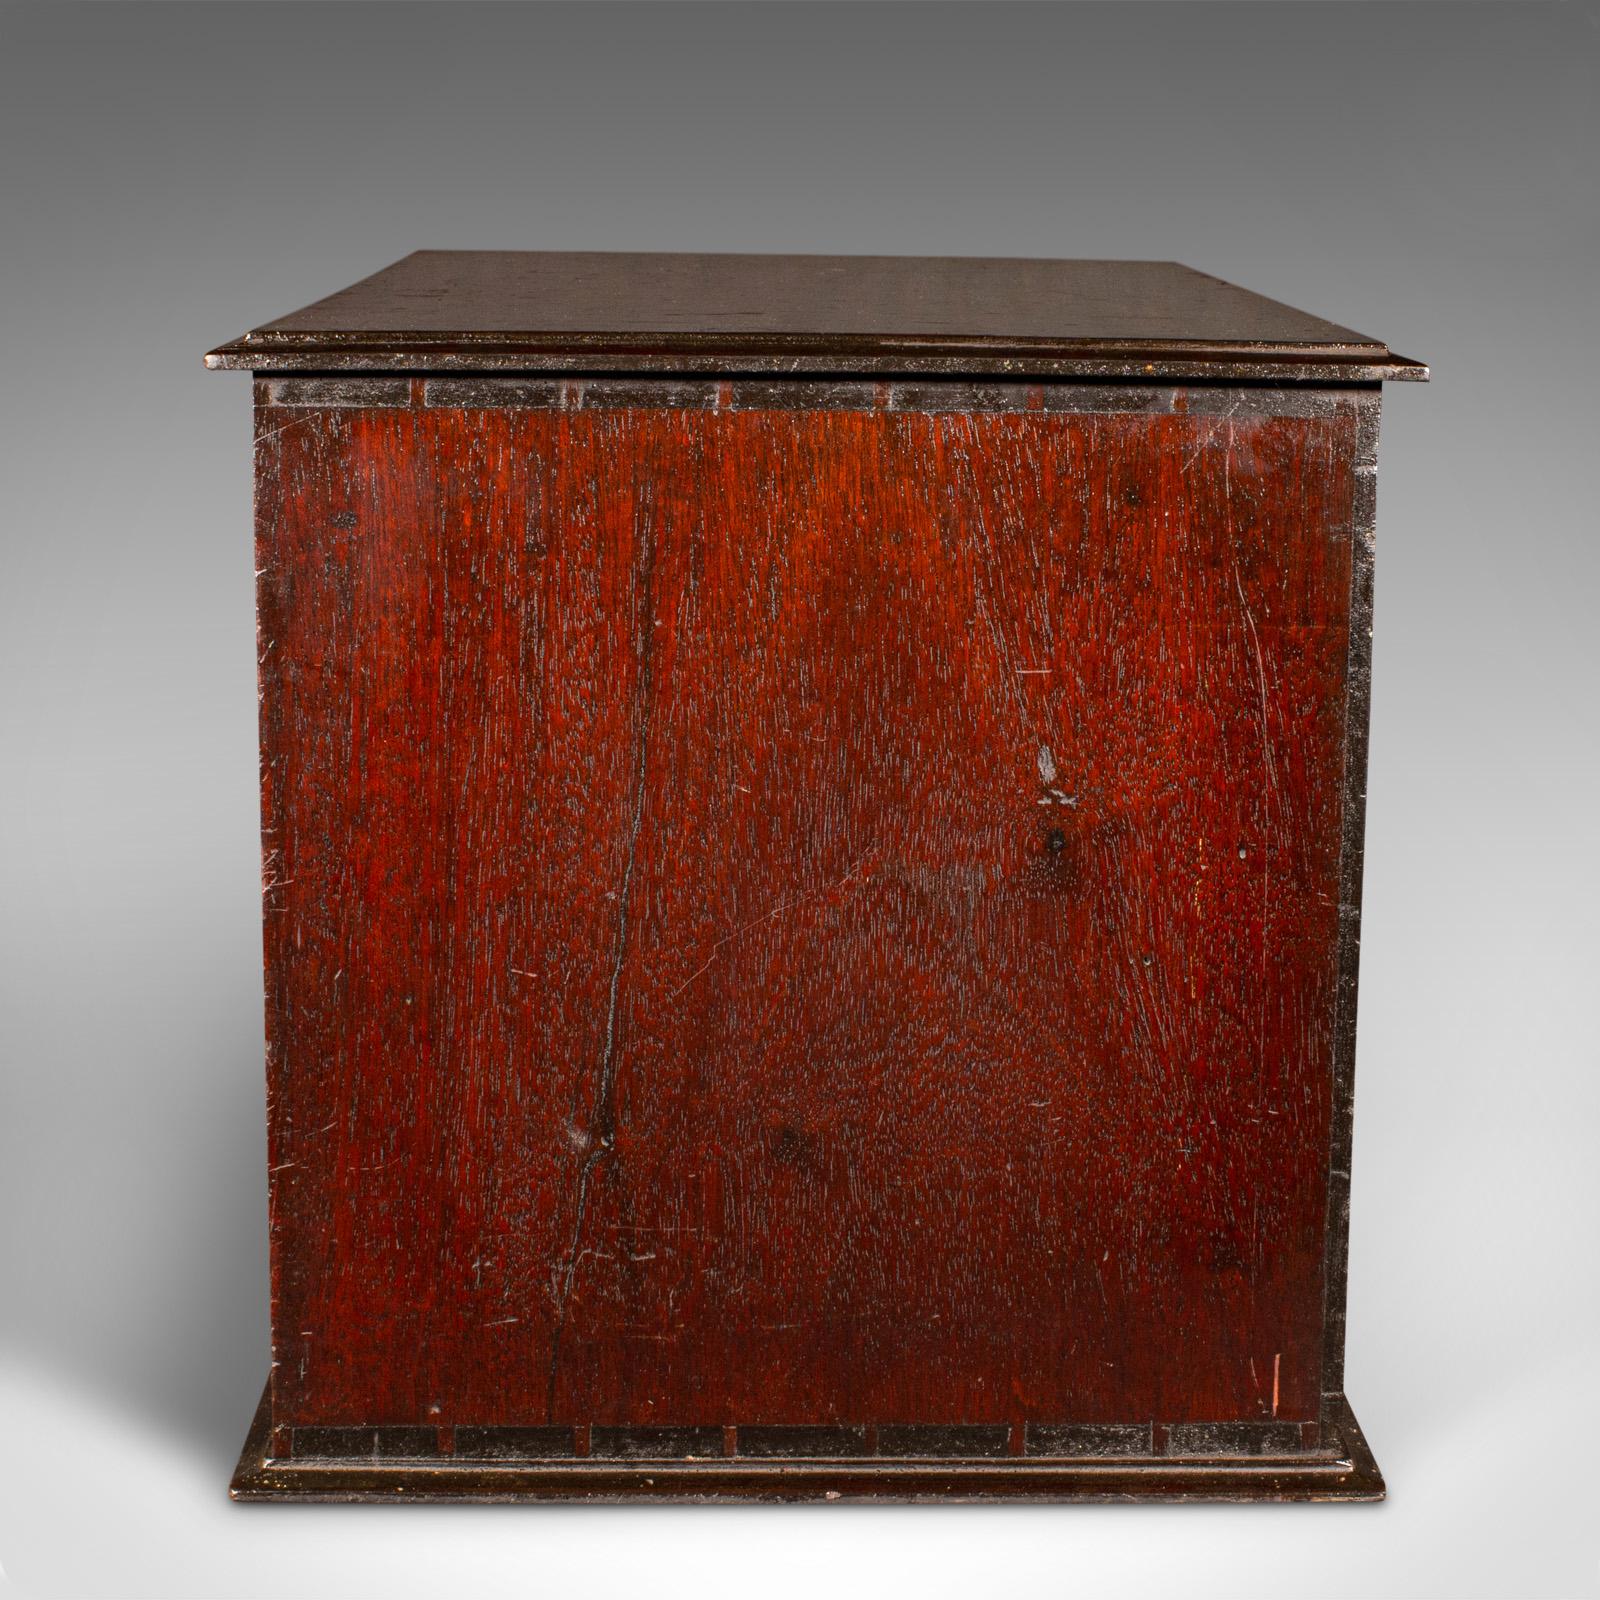 British Antique Watchmaker's Cabinet, English, Tabletop Work Chest, Victorian, C.1860 For Sale